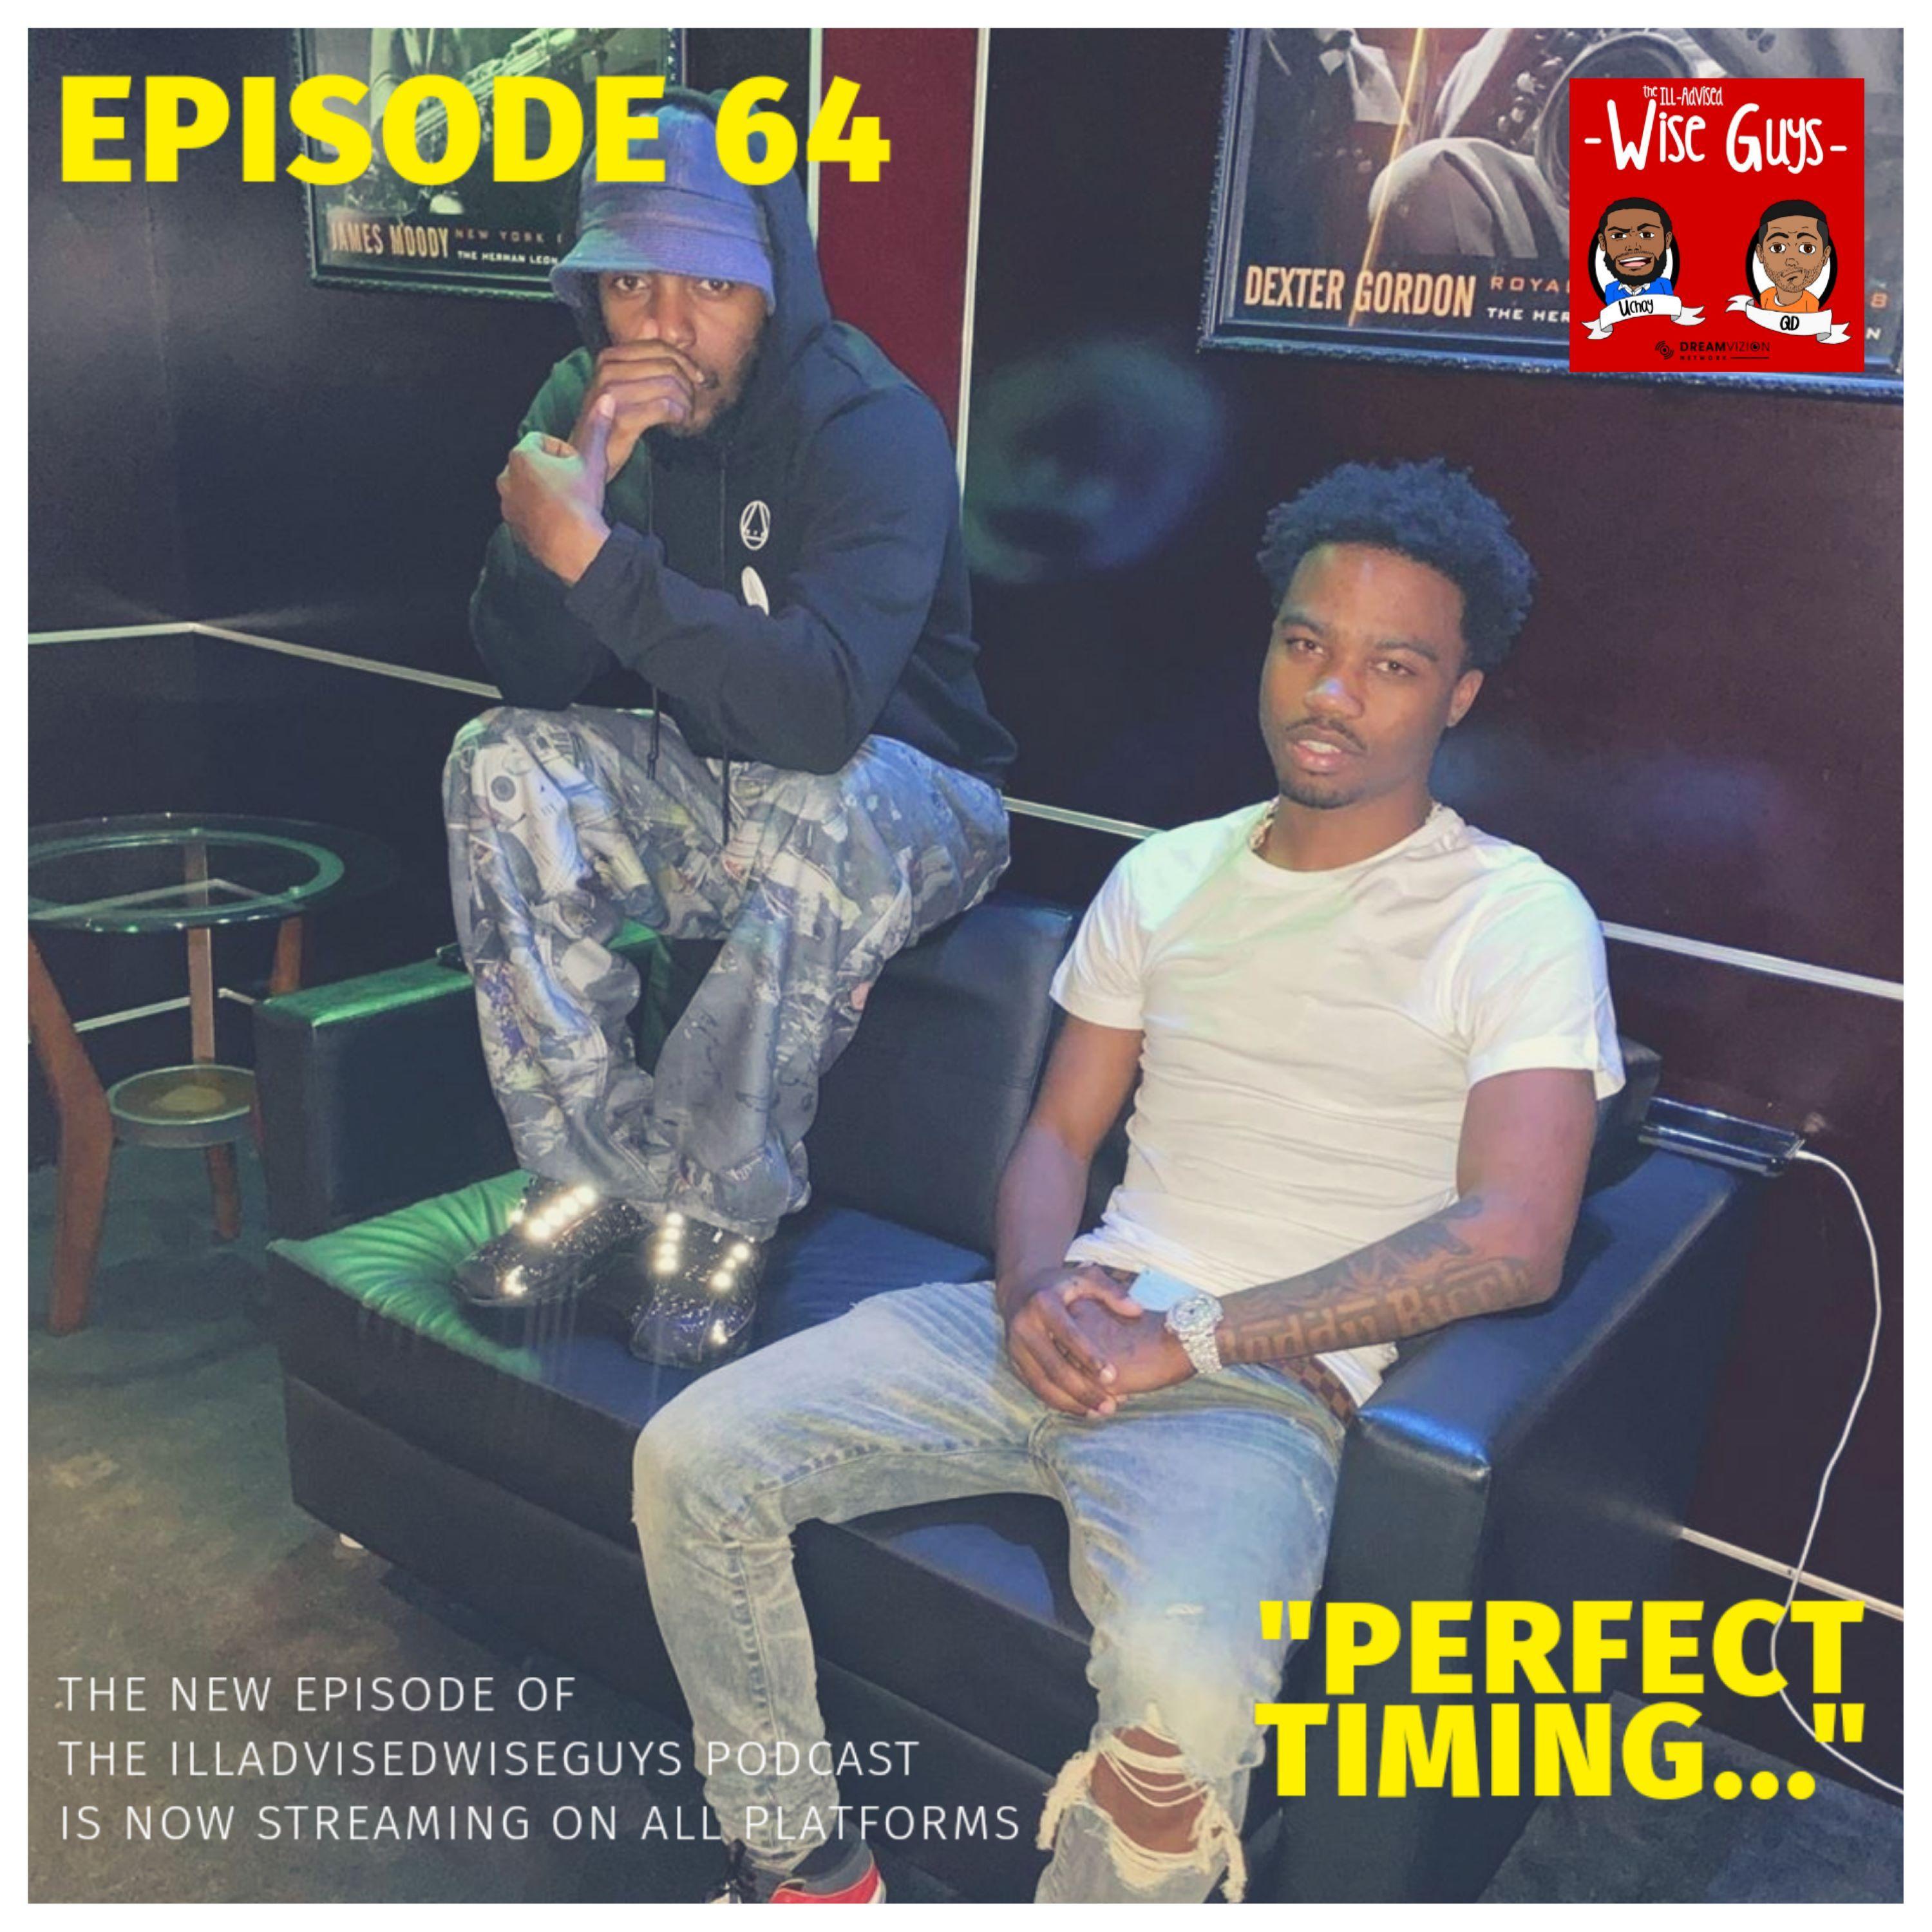 Episode 64 - "Perfect Timing..." Image